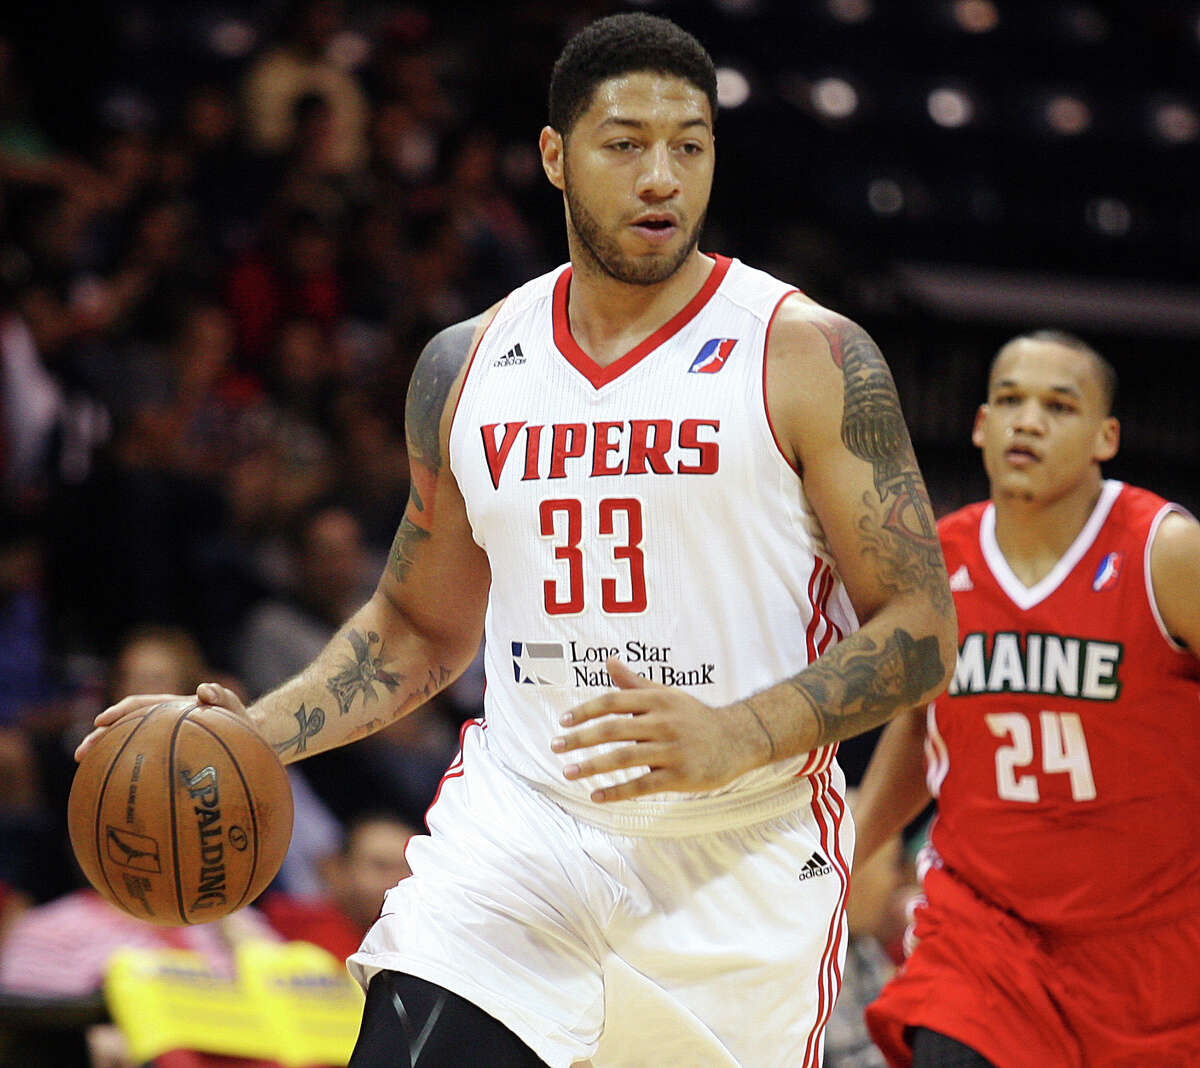 Royce White's future with the Rockets is uncertain after the Rockets left him off the team's summer-league roster.